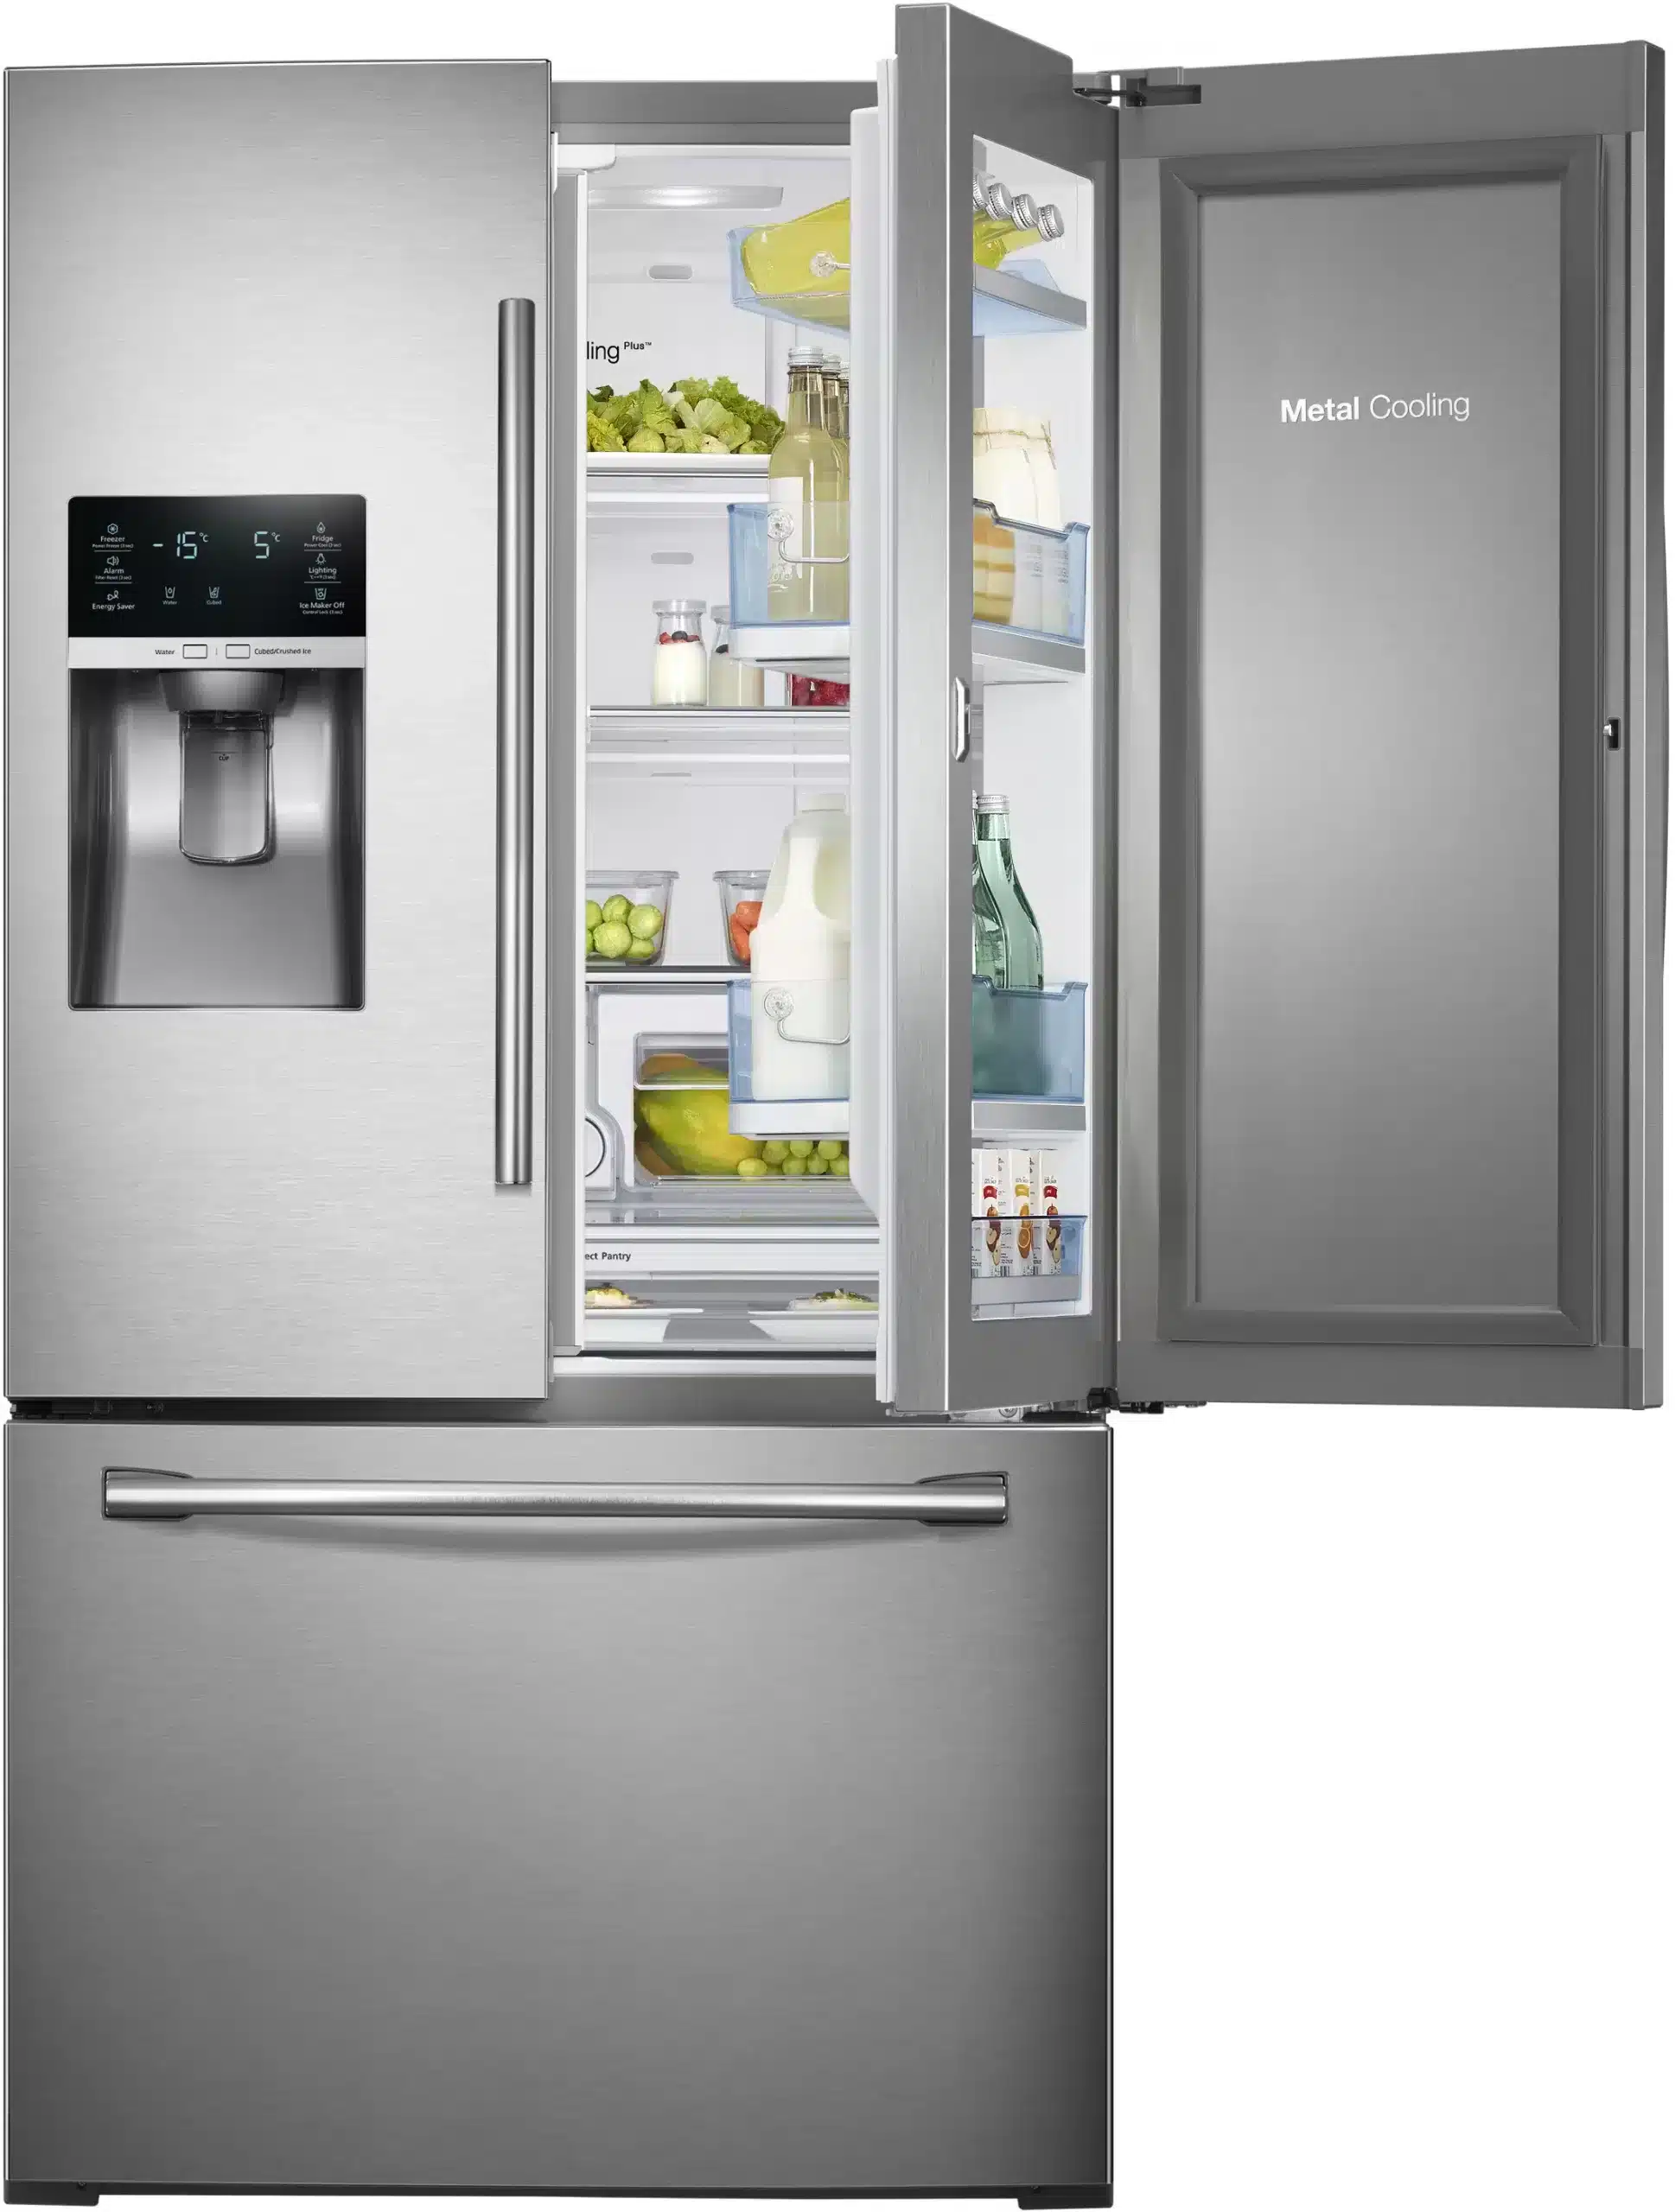 how-to-reset-samsung-fridge-after-a-forced-defrost